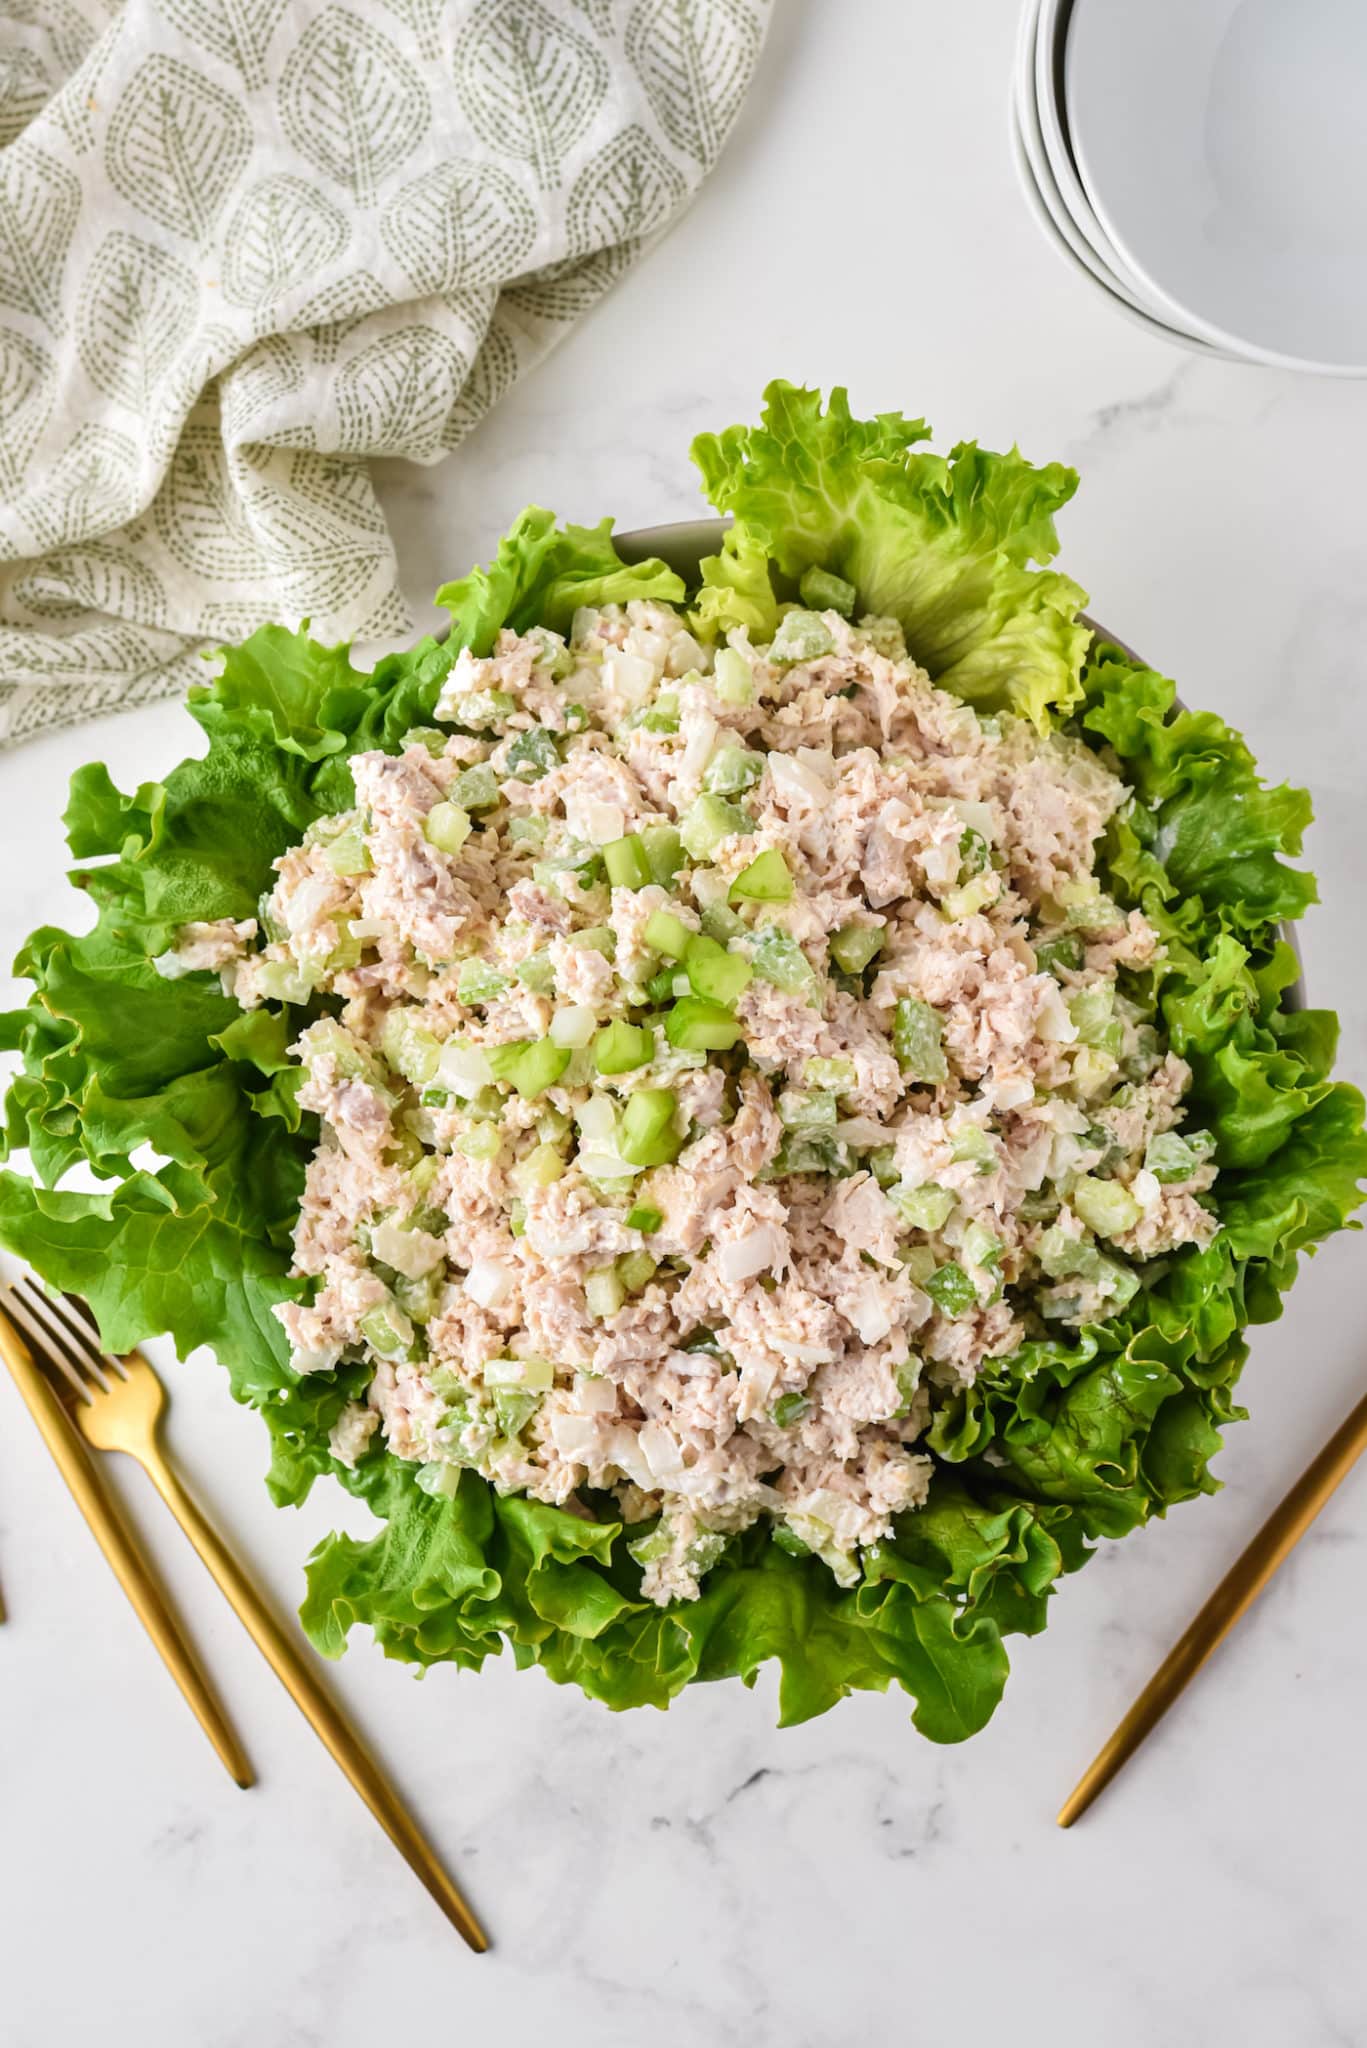 Large serving bowl of green lettuce topped with costco chicken salad.